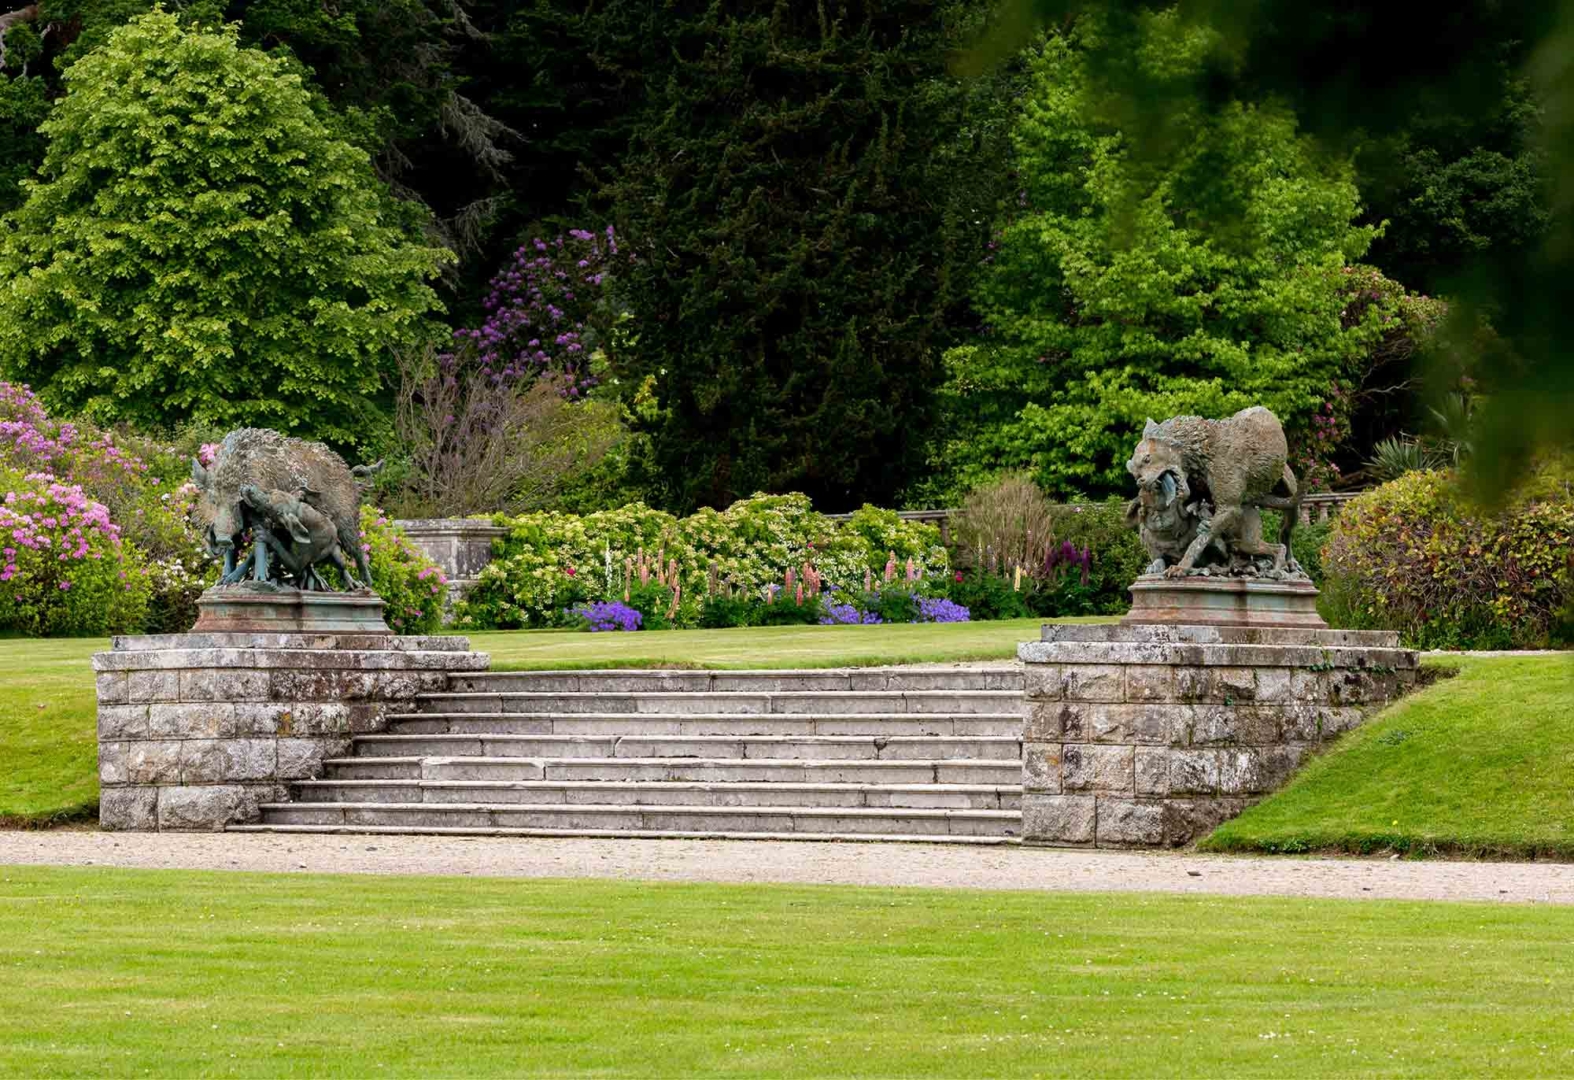 Explore Ireland's Past at Curraghmore House & Garden